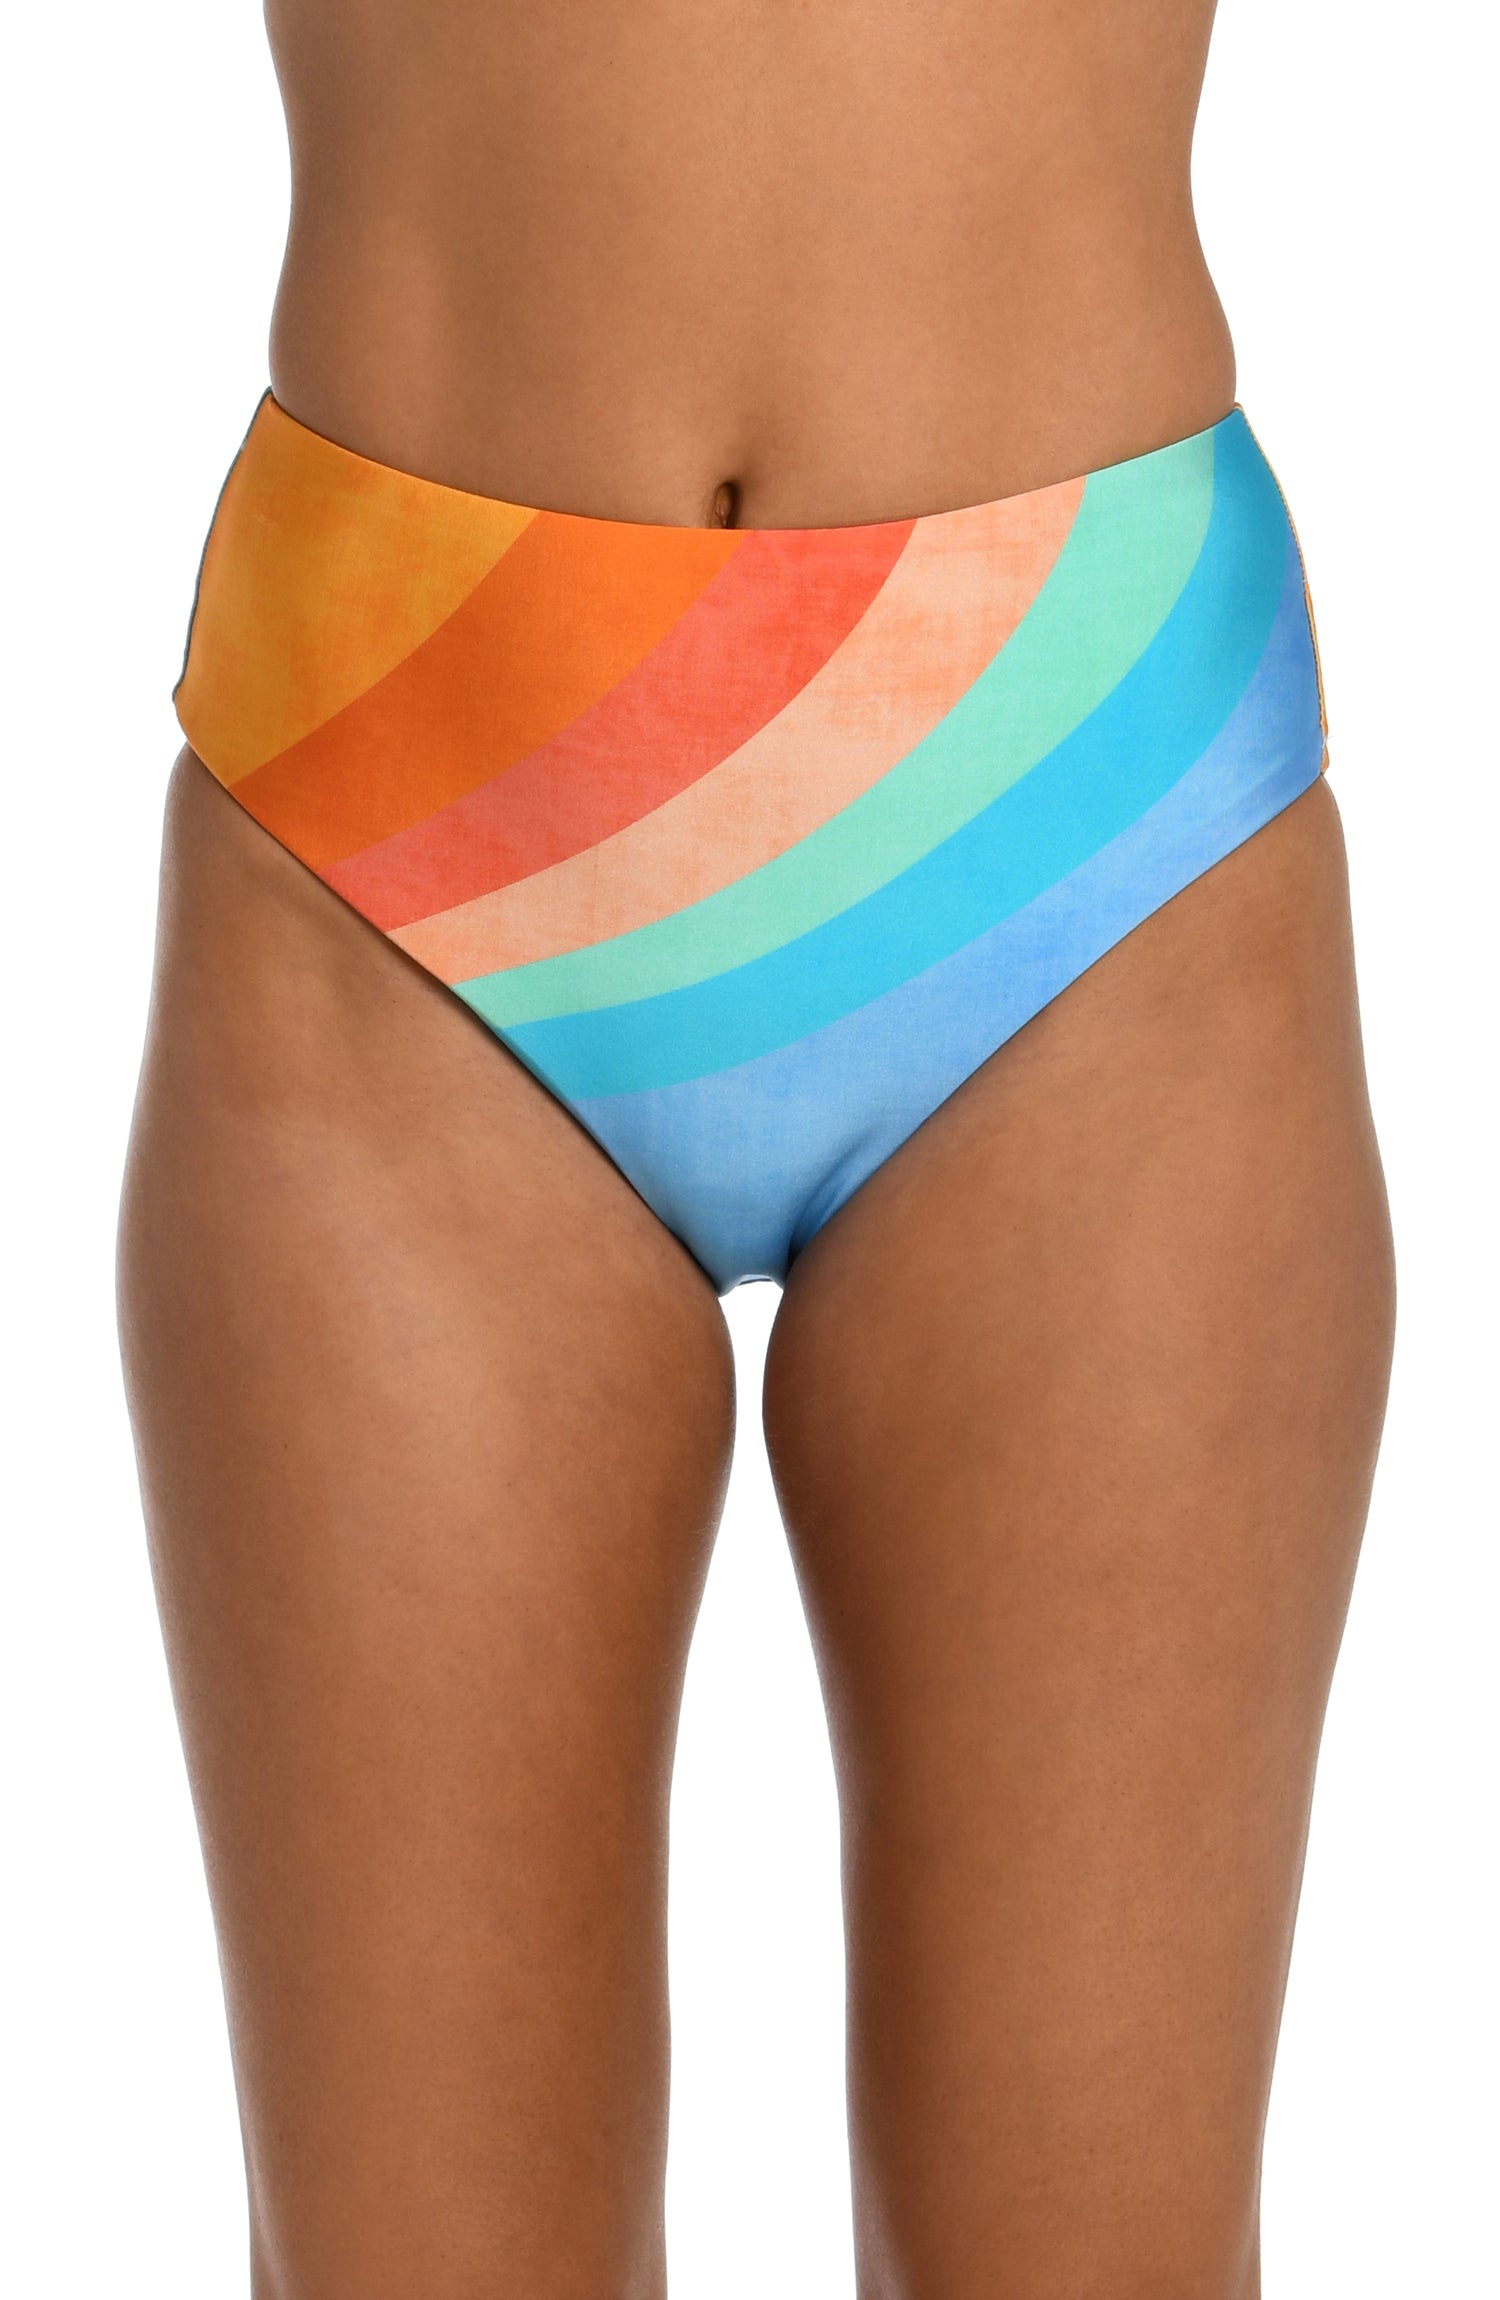 Model is wearing an orange and blue multicolored retro printed high waist bikini bottom from our Mod Block collection.